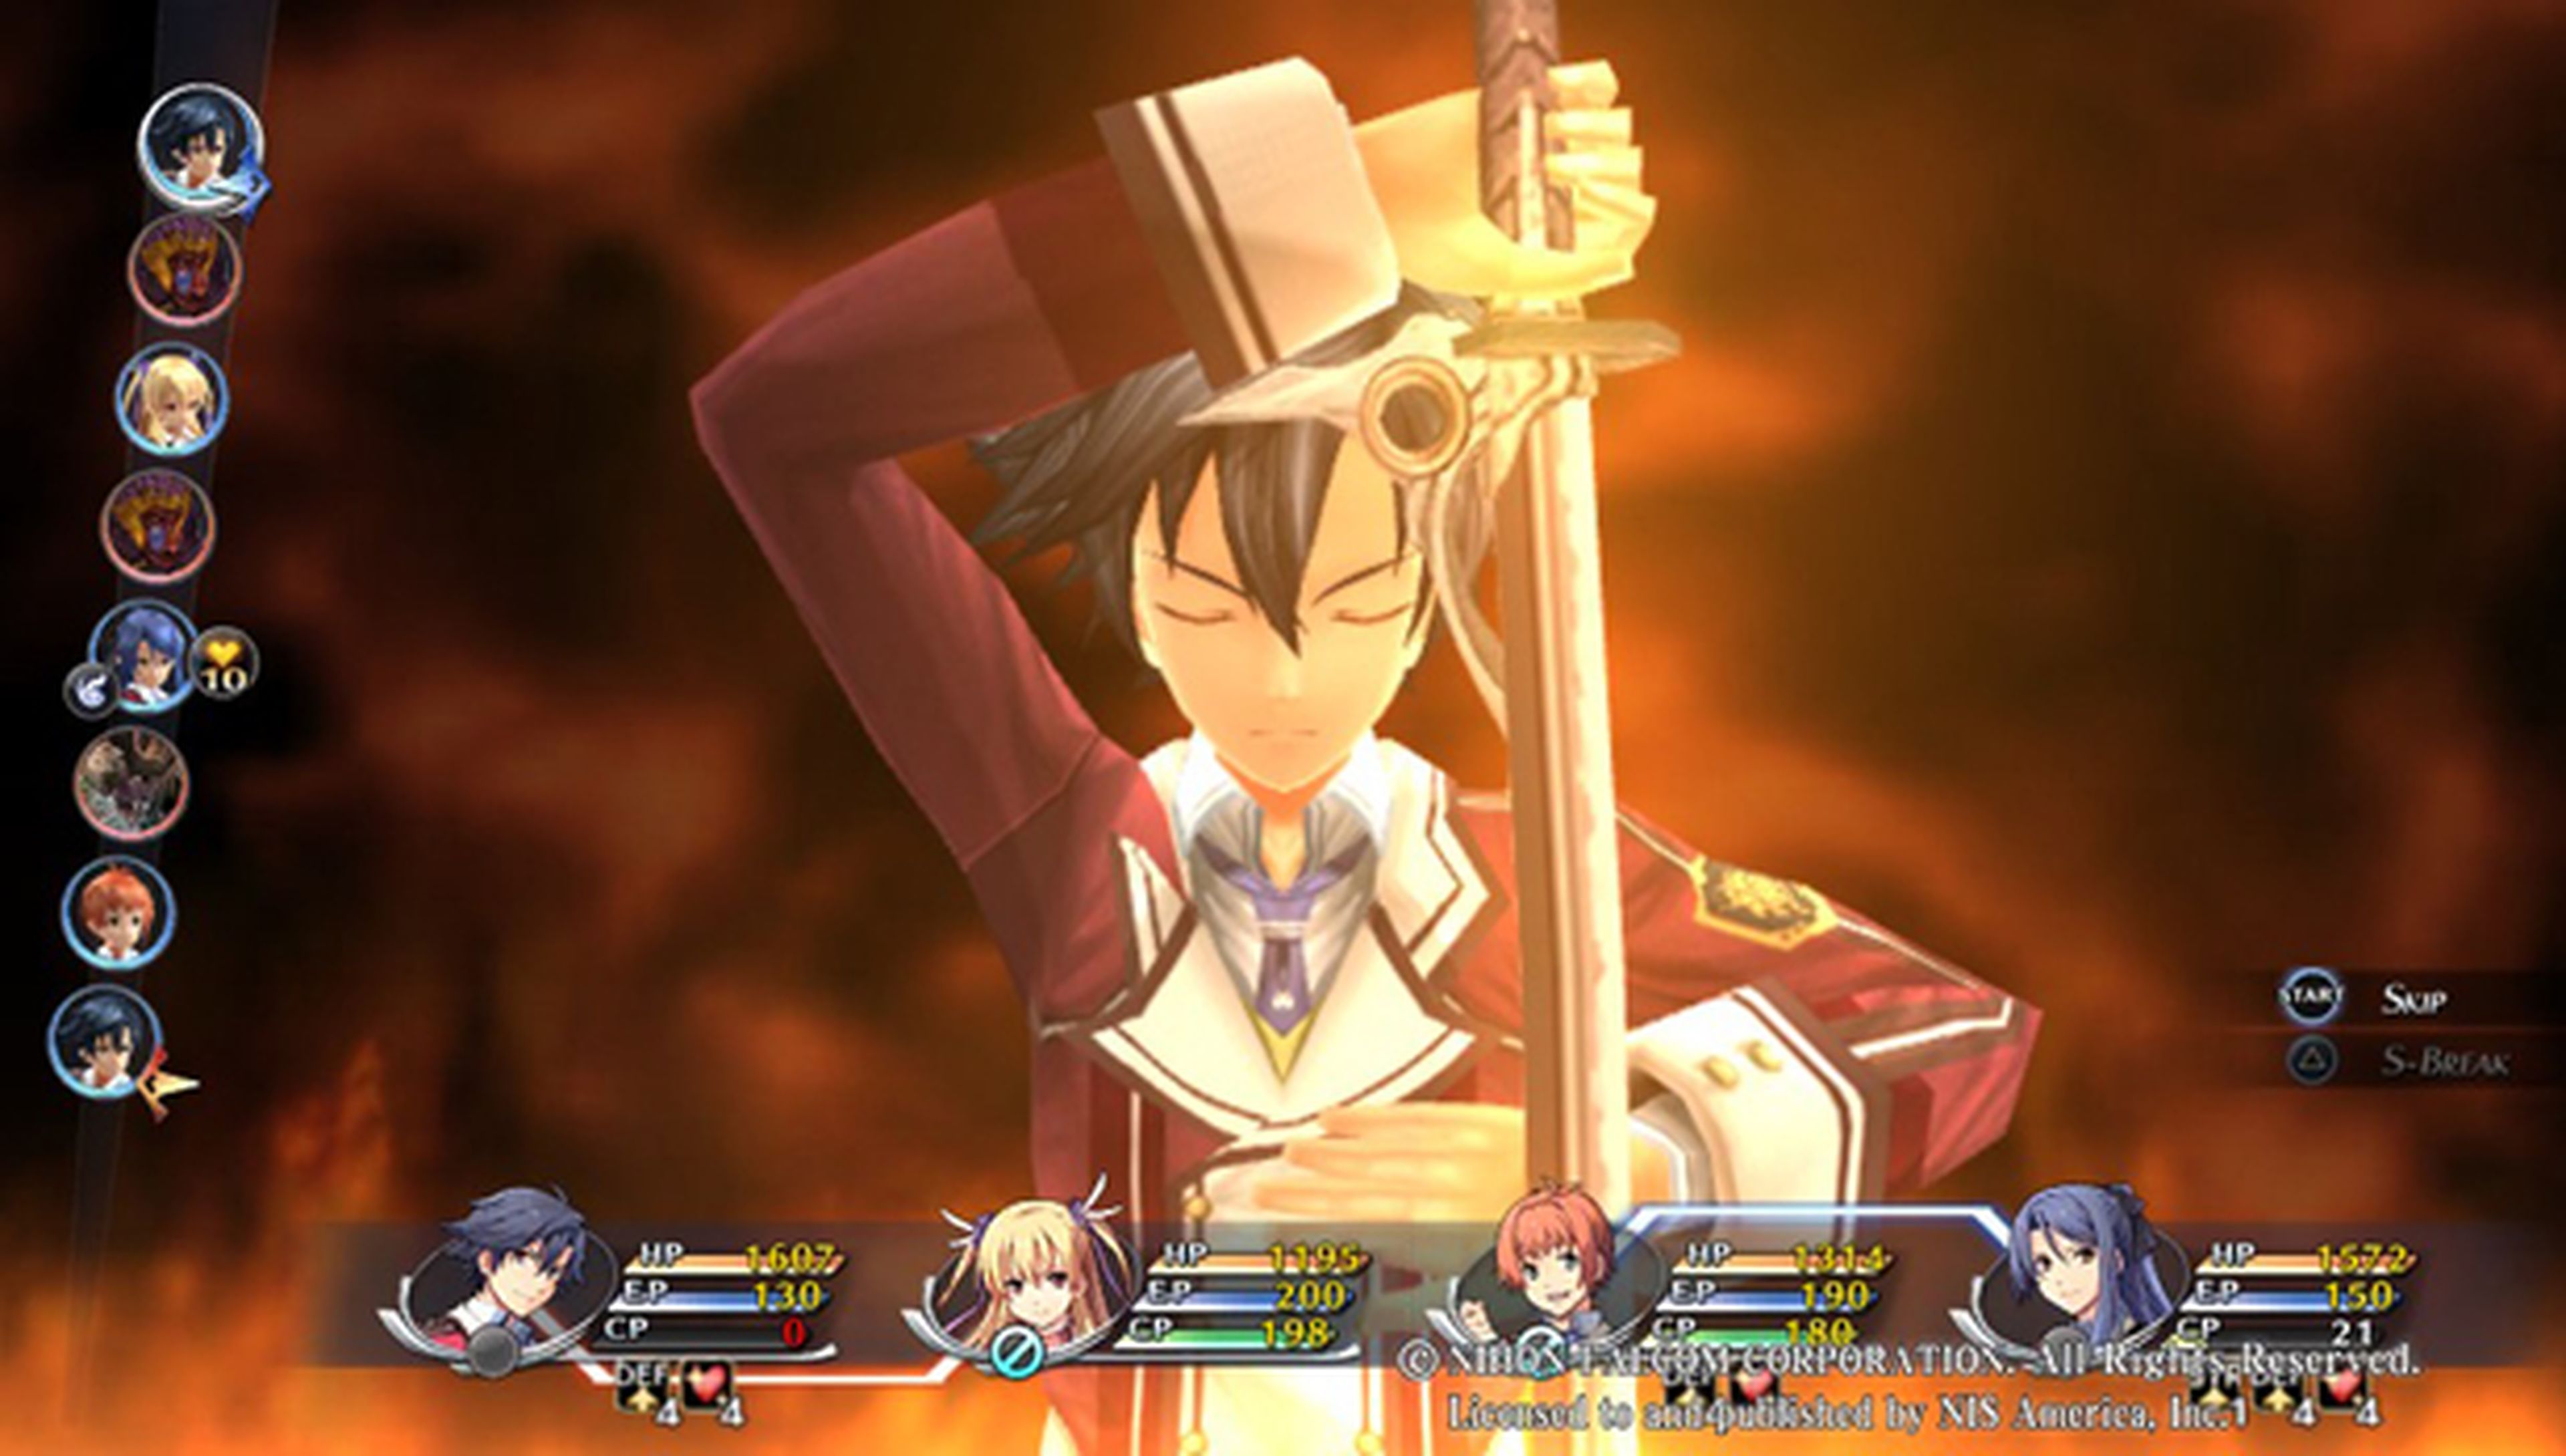 Análisis de The Legend of Heroes: Trails of Cold Steel